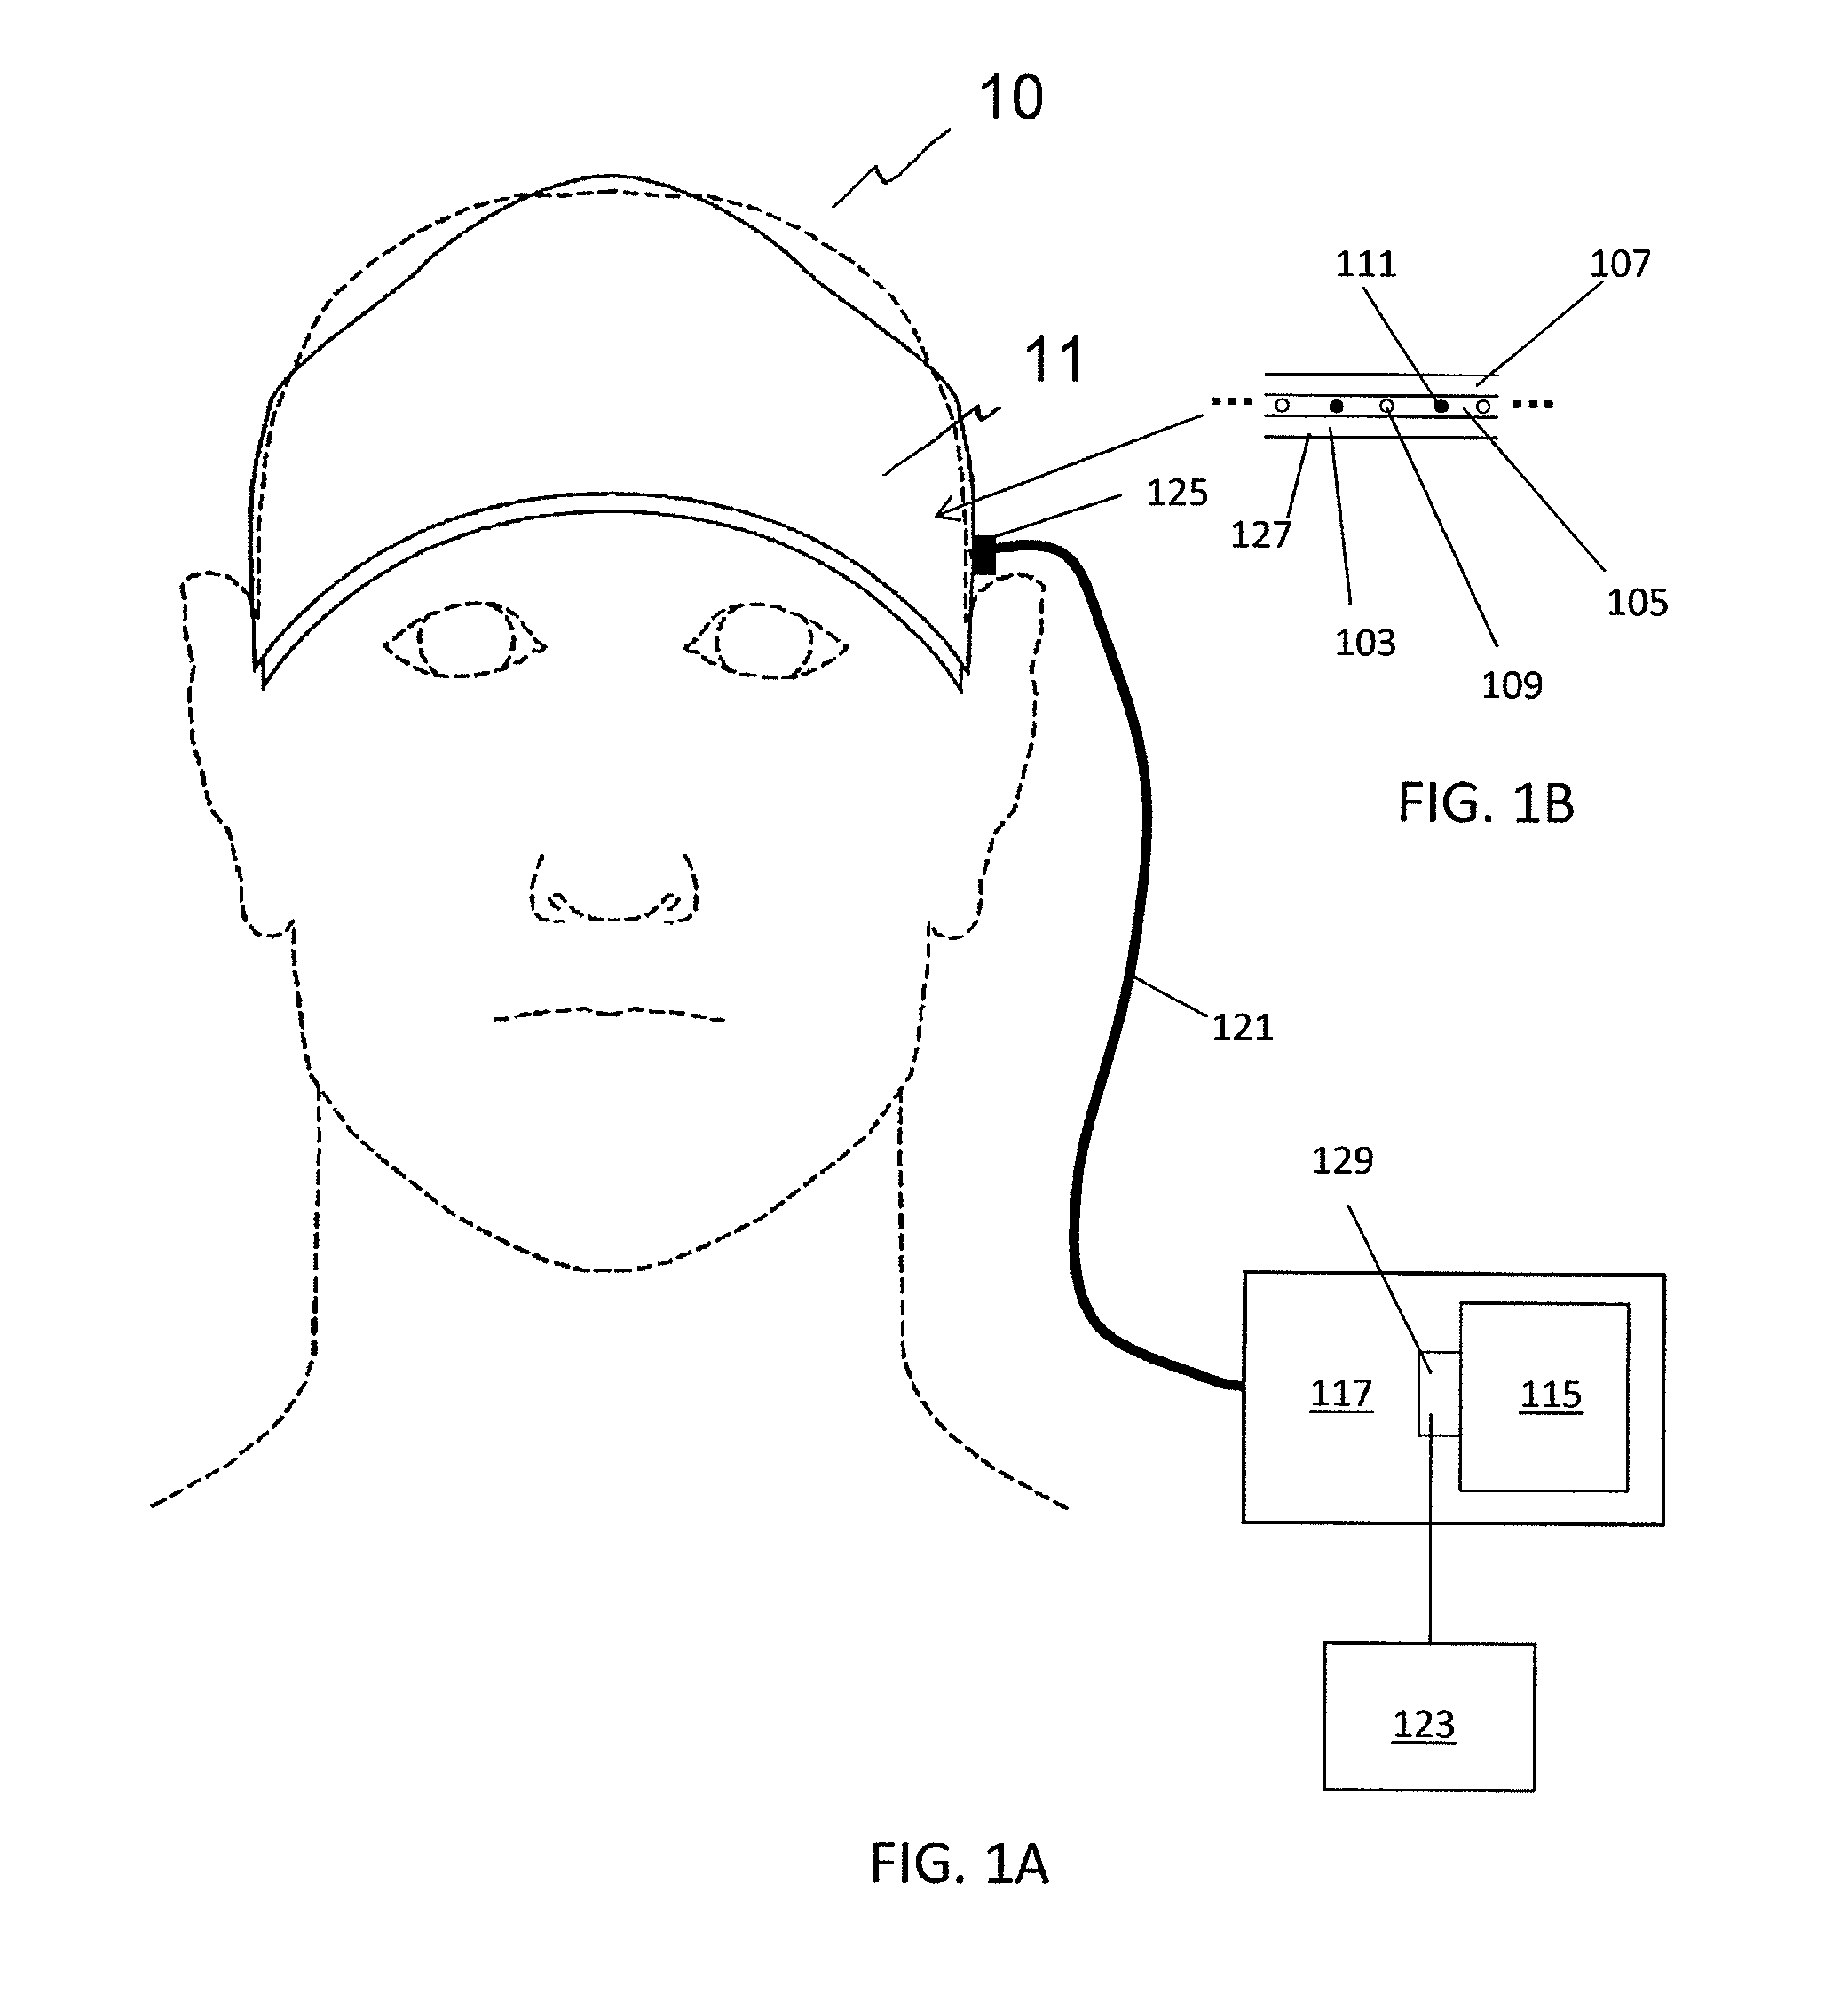 Method and apparatus of noninvasive, regional brain thermal stimuli for the treatment of neurological disorders